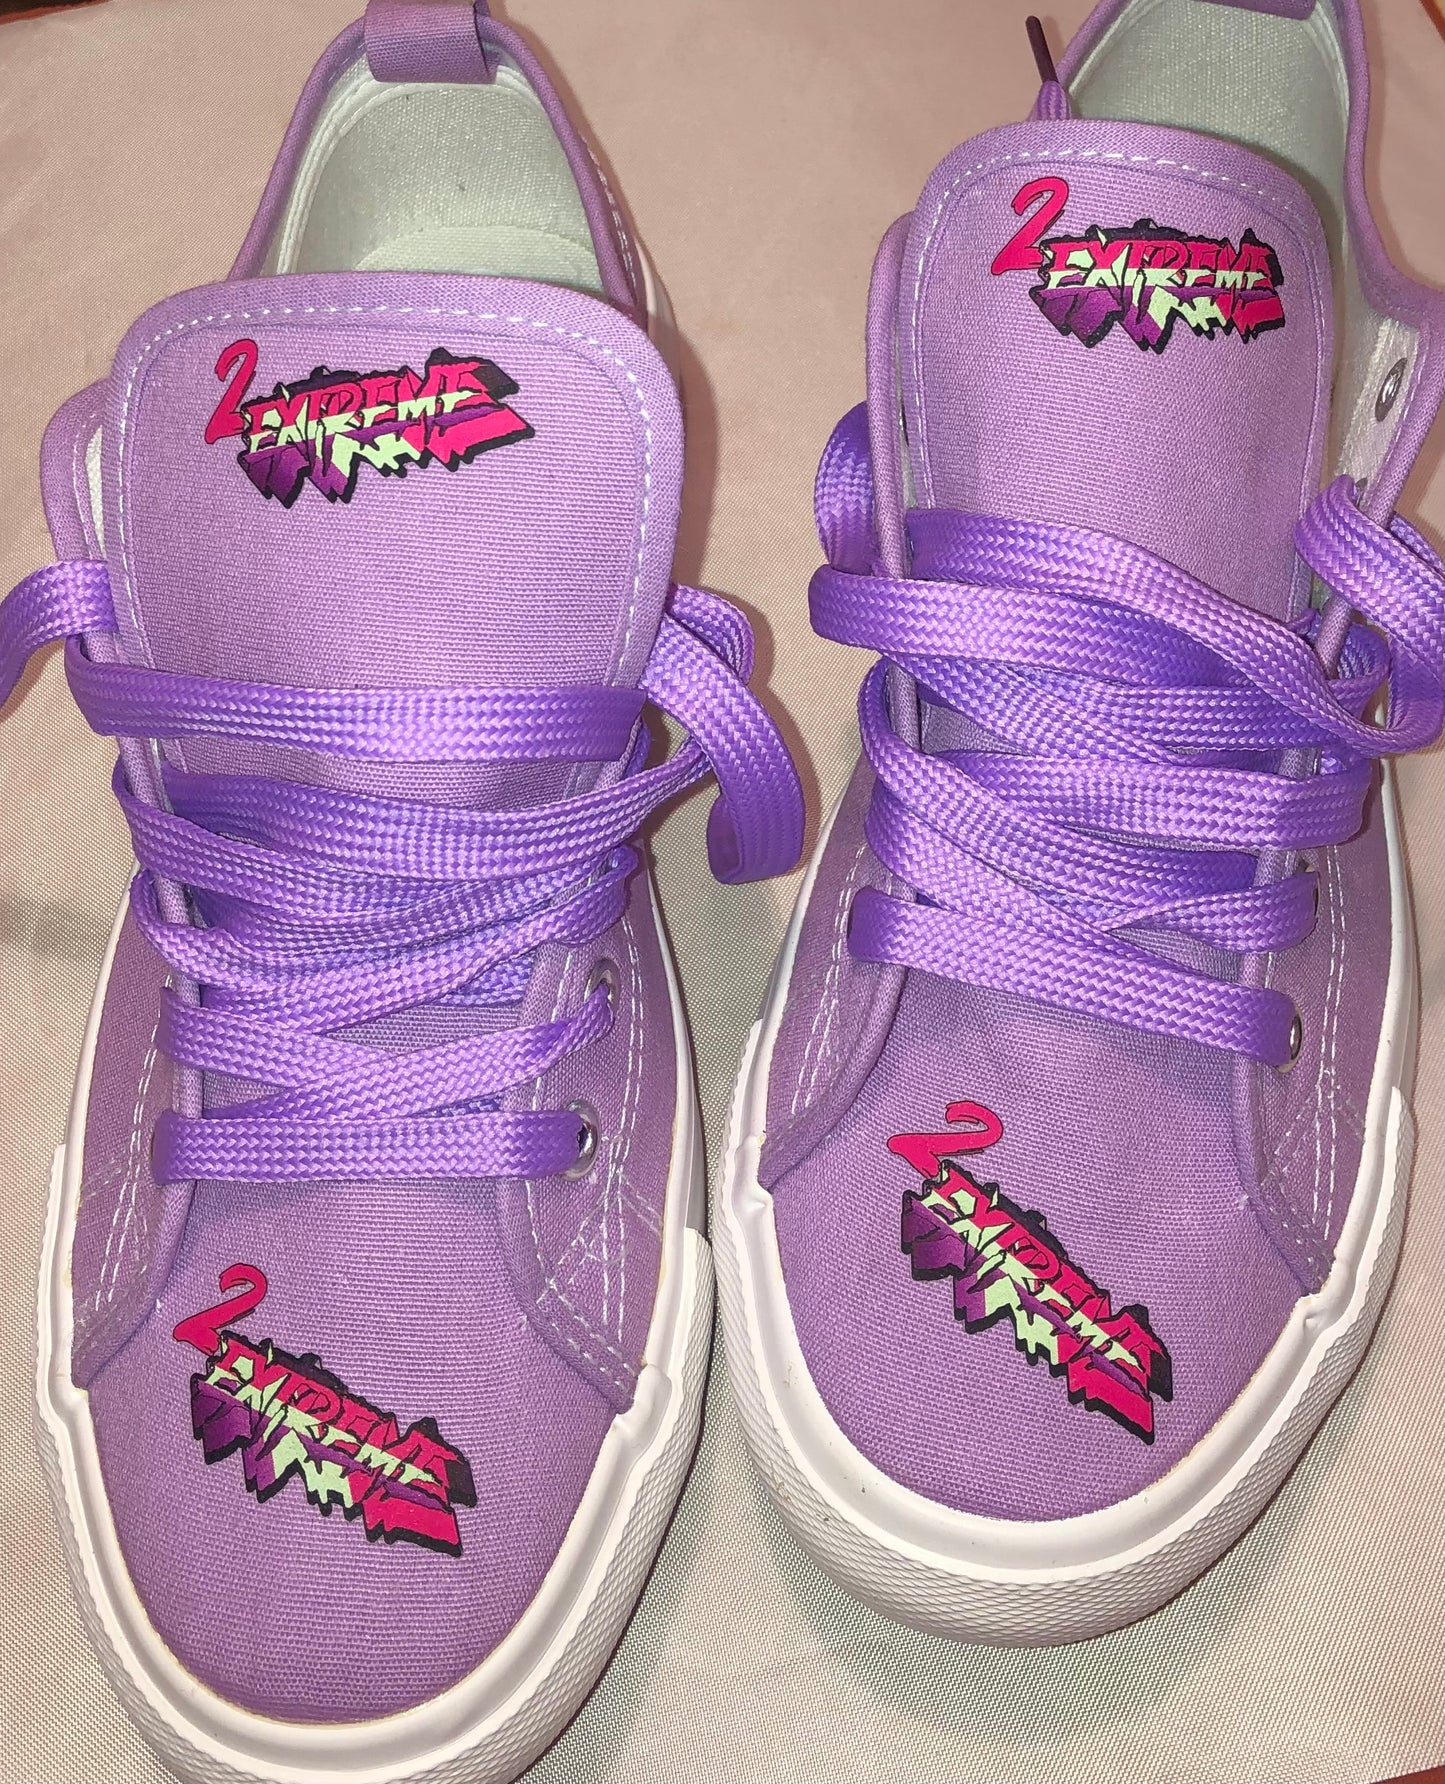 2extreme- Purple Canvas Sneakers – 2EXTREME